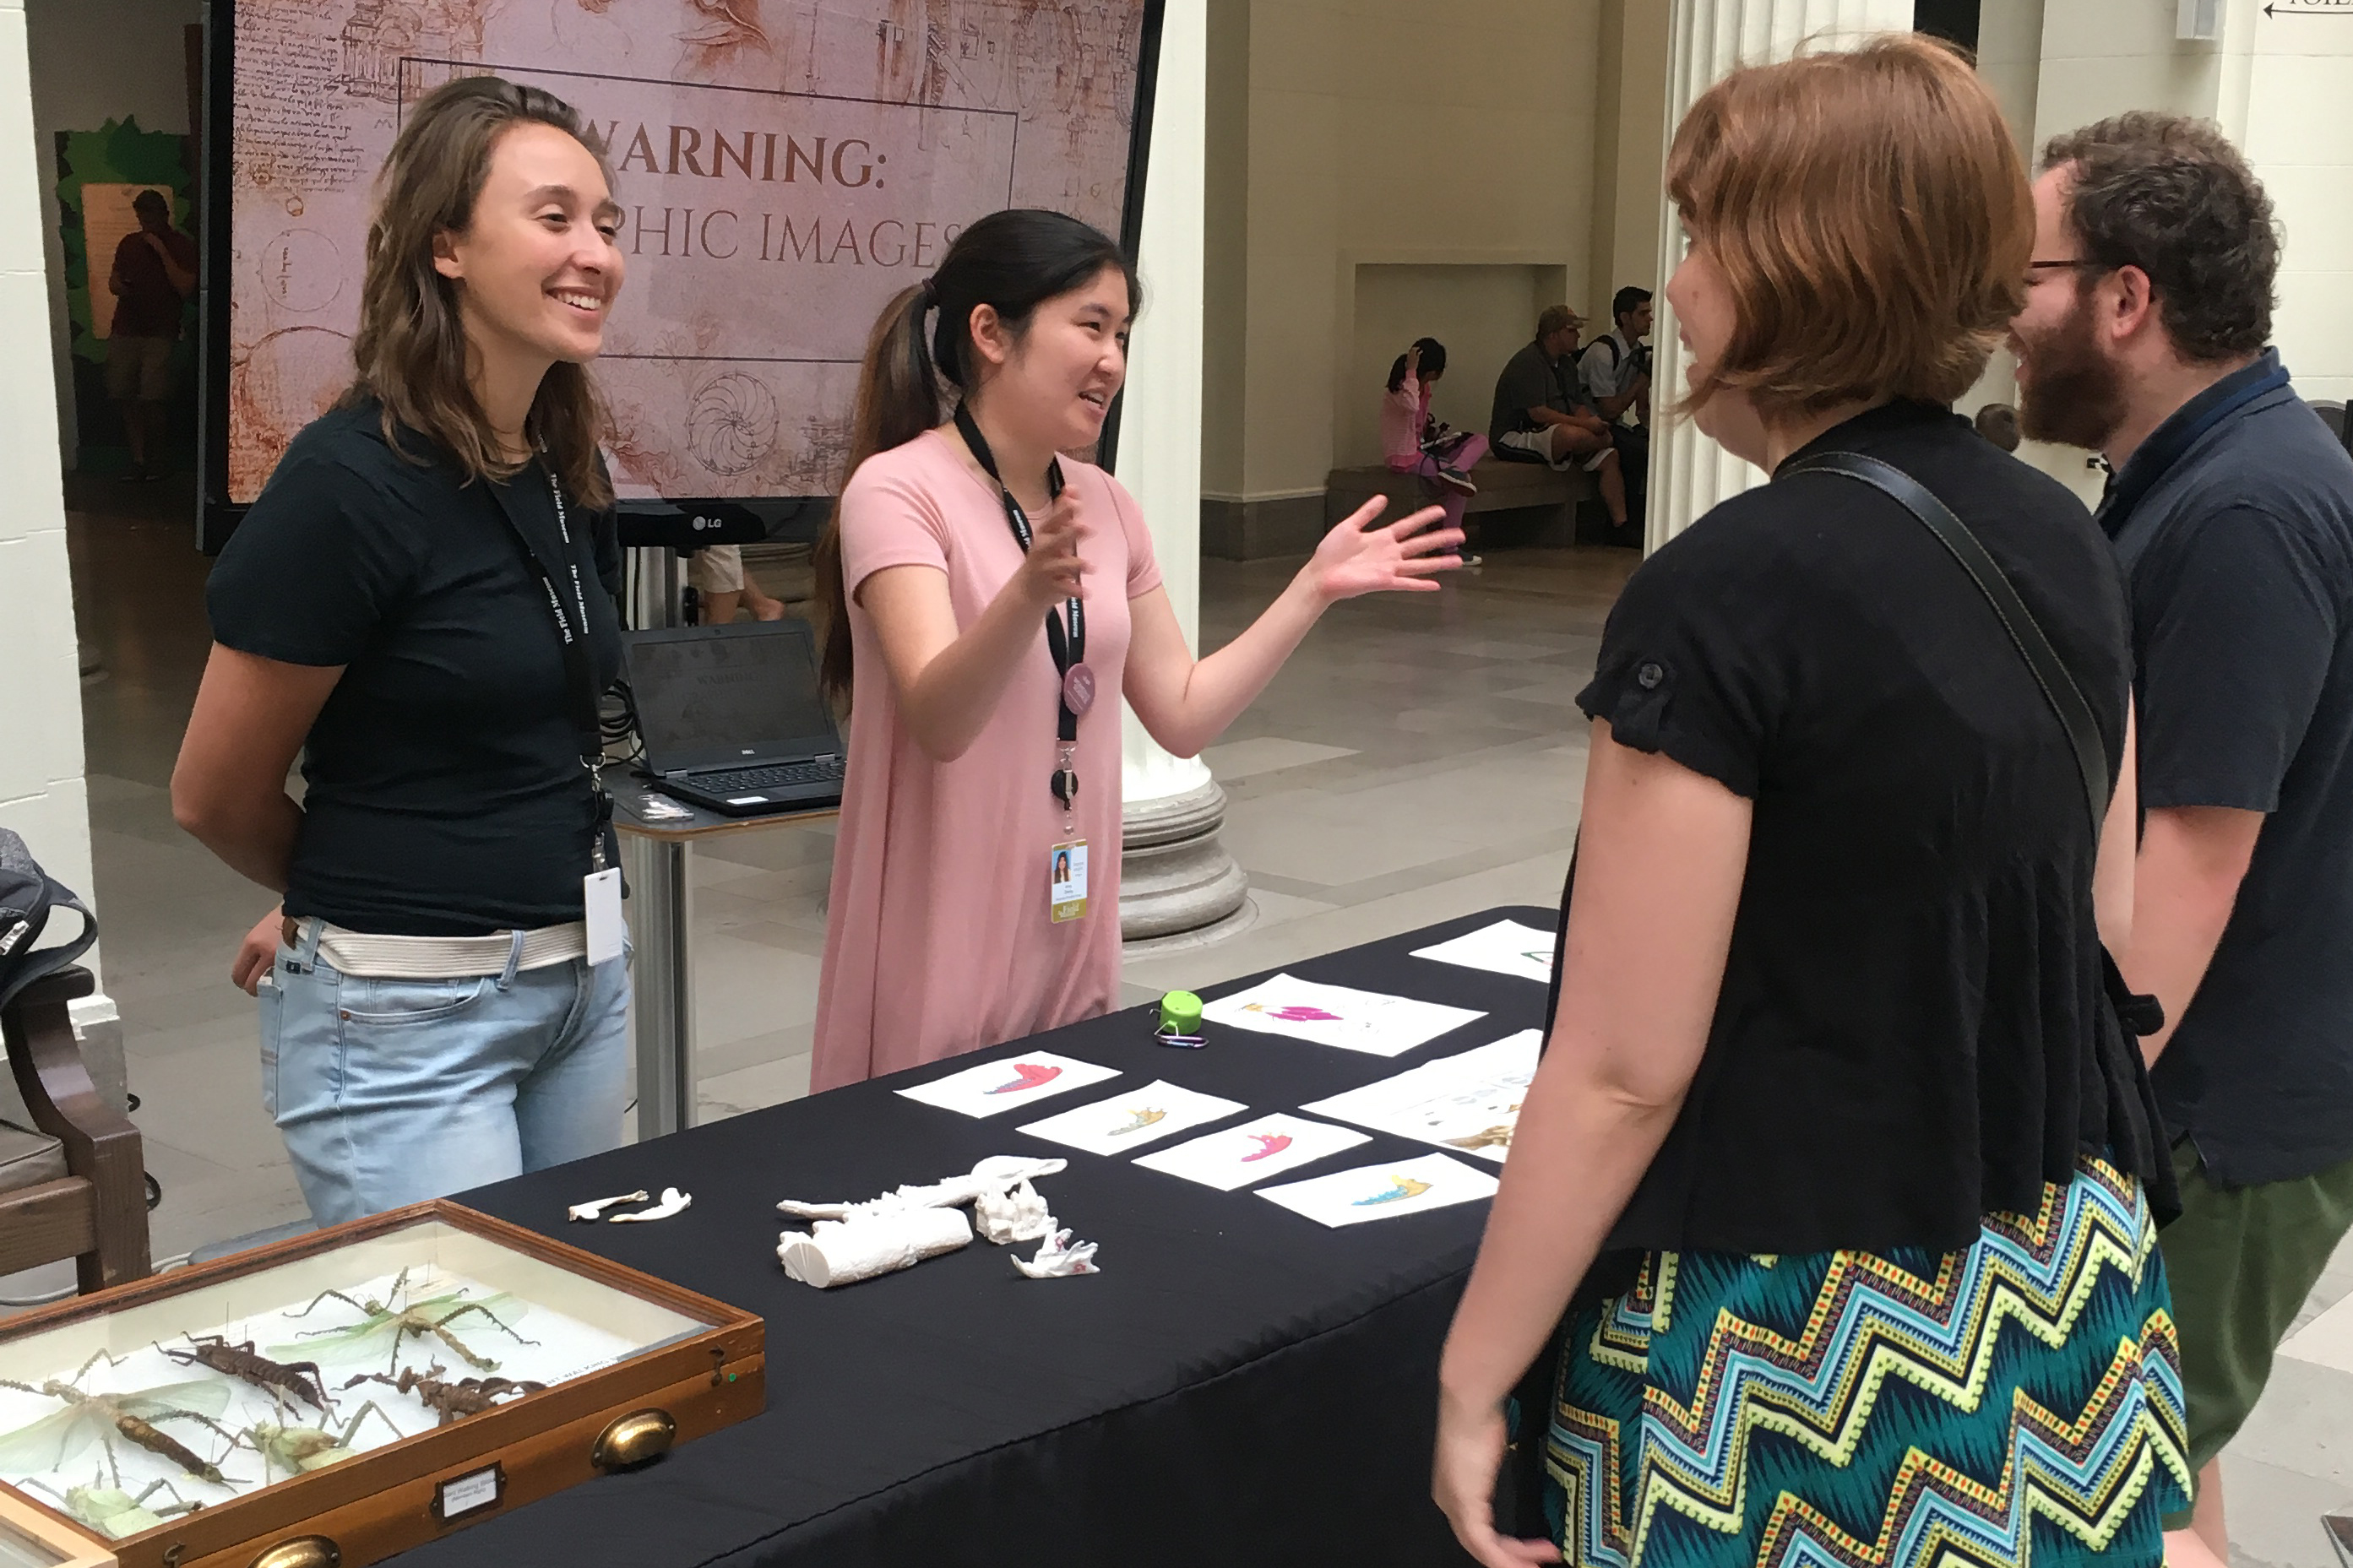 Two interns stand behind a table displaying objects from the Field Museum’s collection. One speaks with the two people in front of her, gesturing as if she’s showing the size of something.